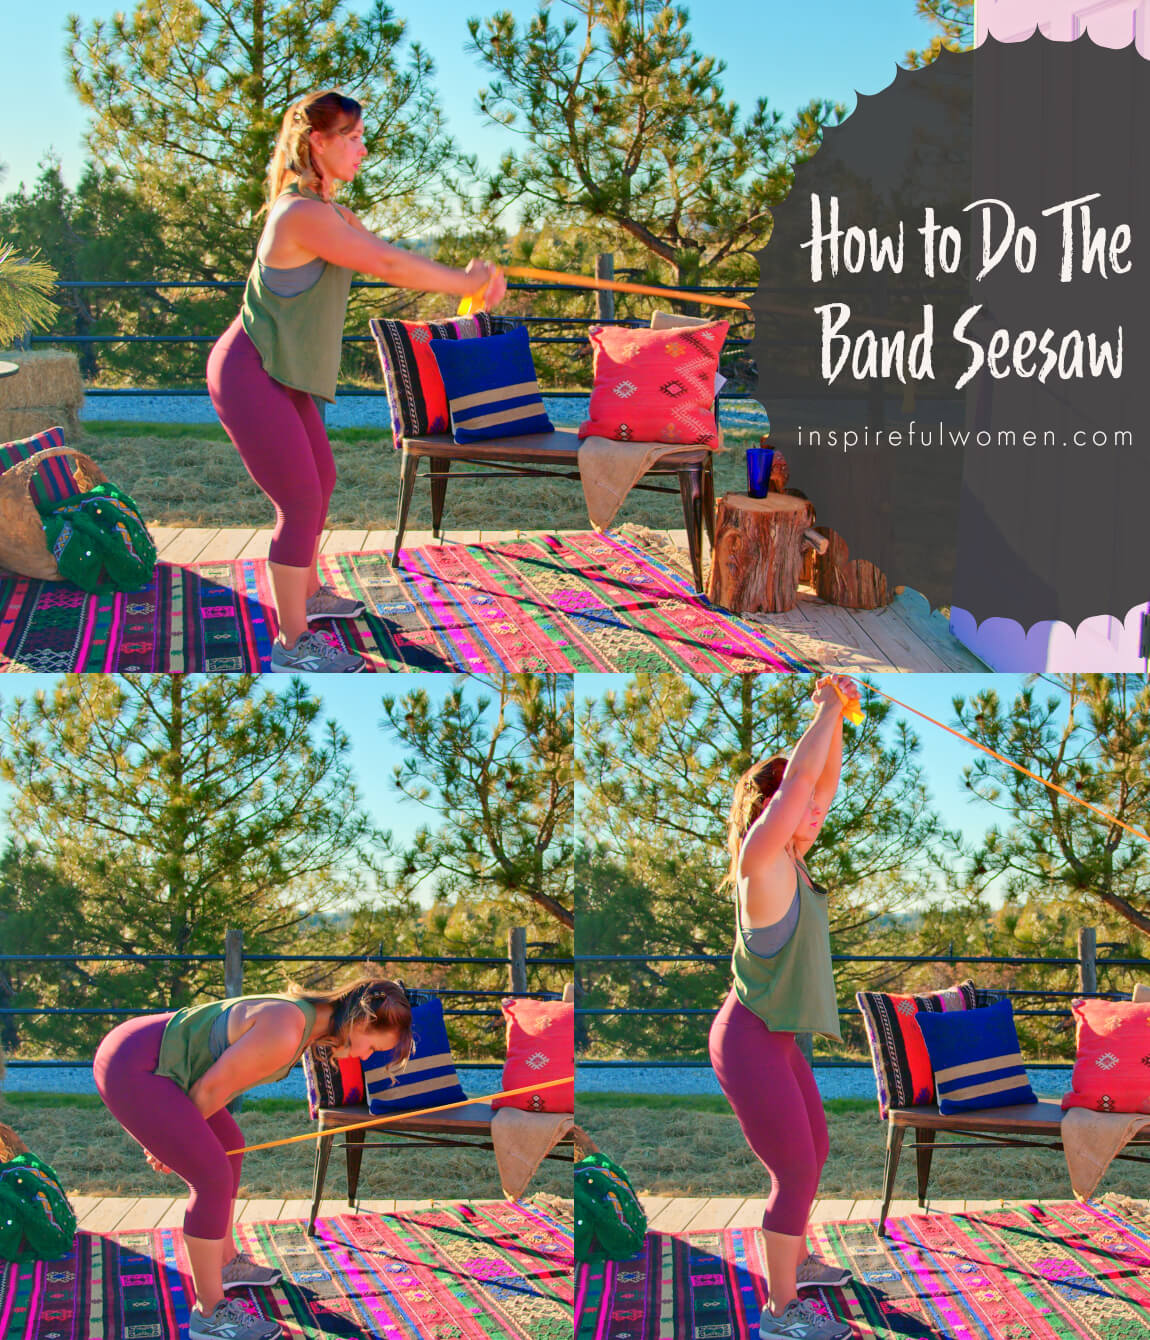 how-to-resistance-band-seesaw-neutral-spine-core-exercise-at-home-proper-form